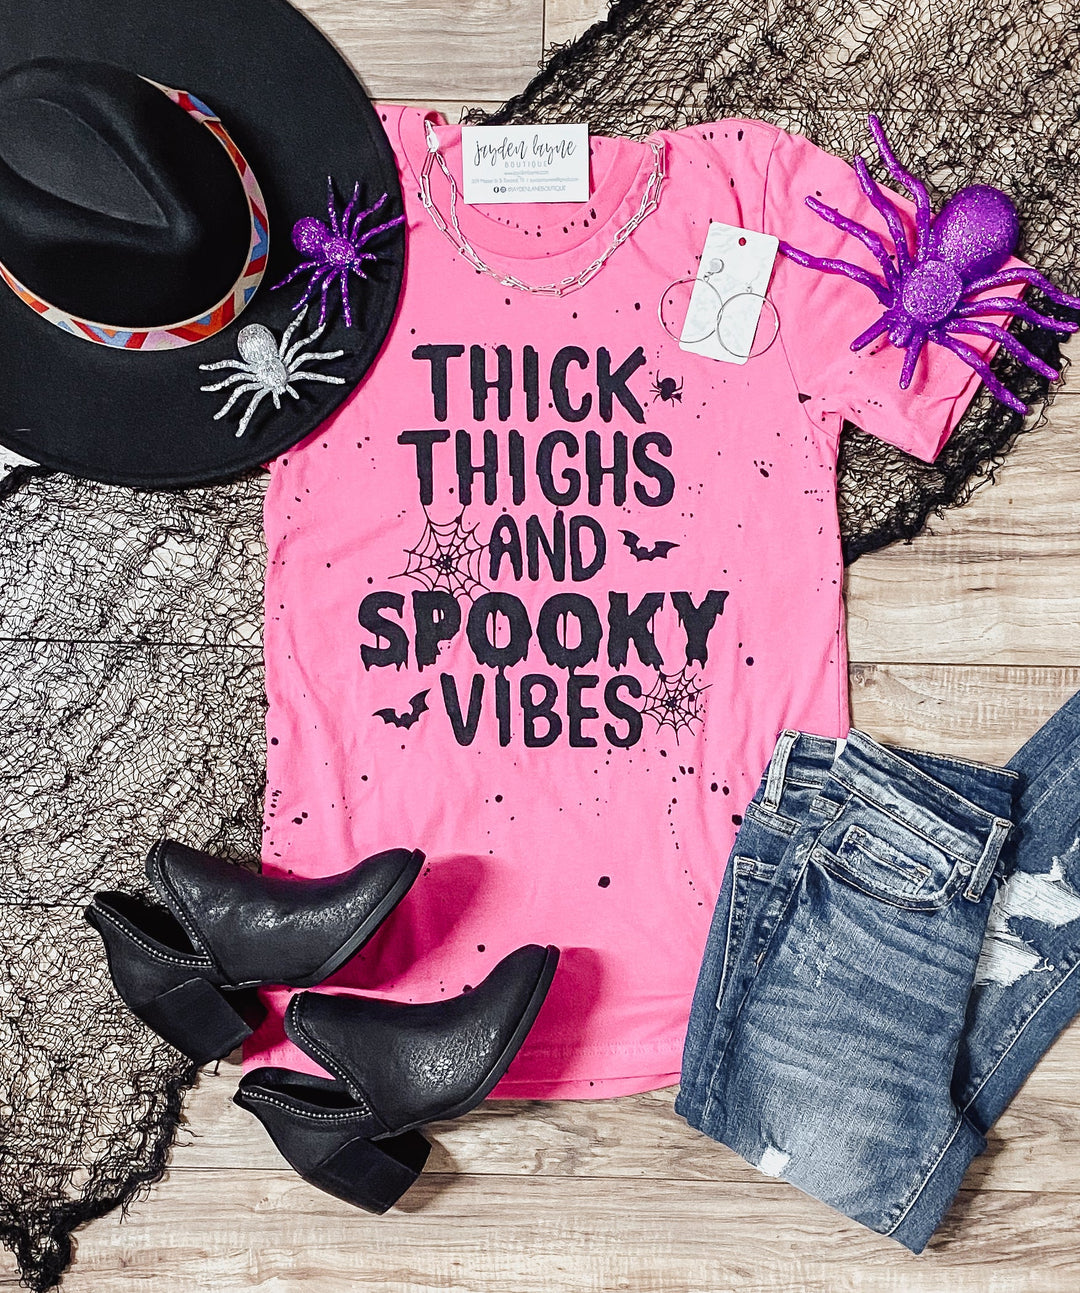 Thick thighs & spooky vibes tee - Jayden Layne